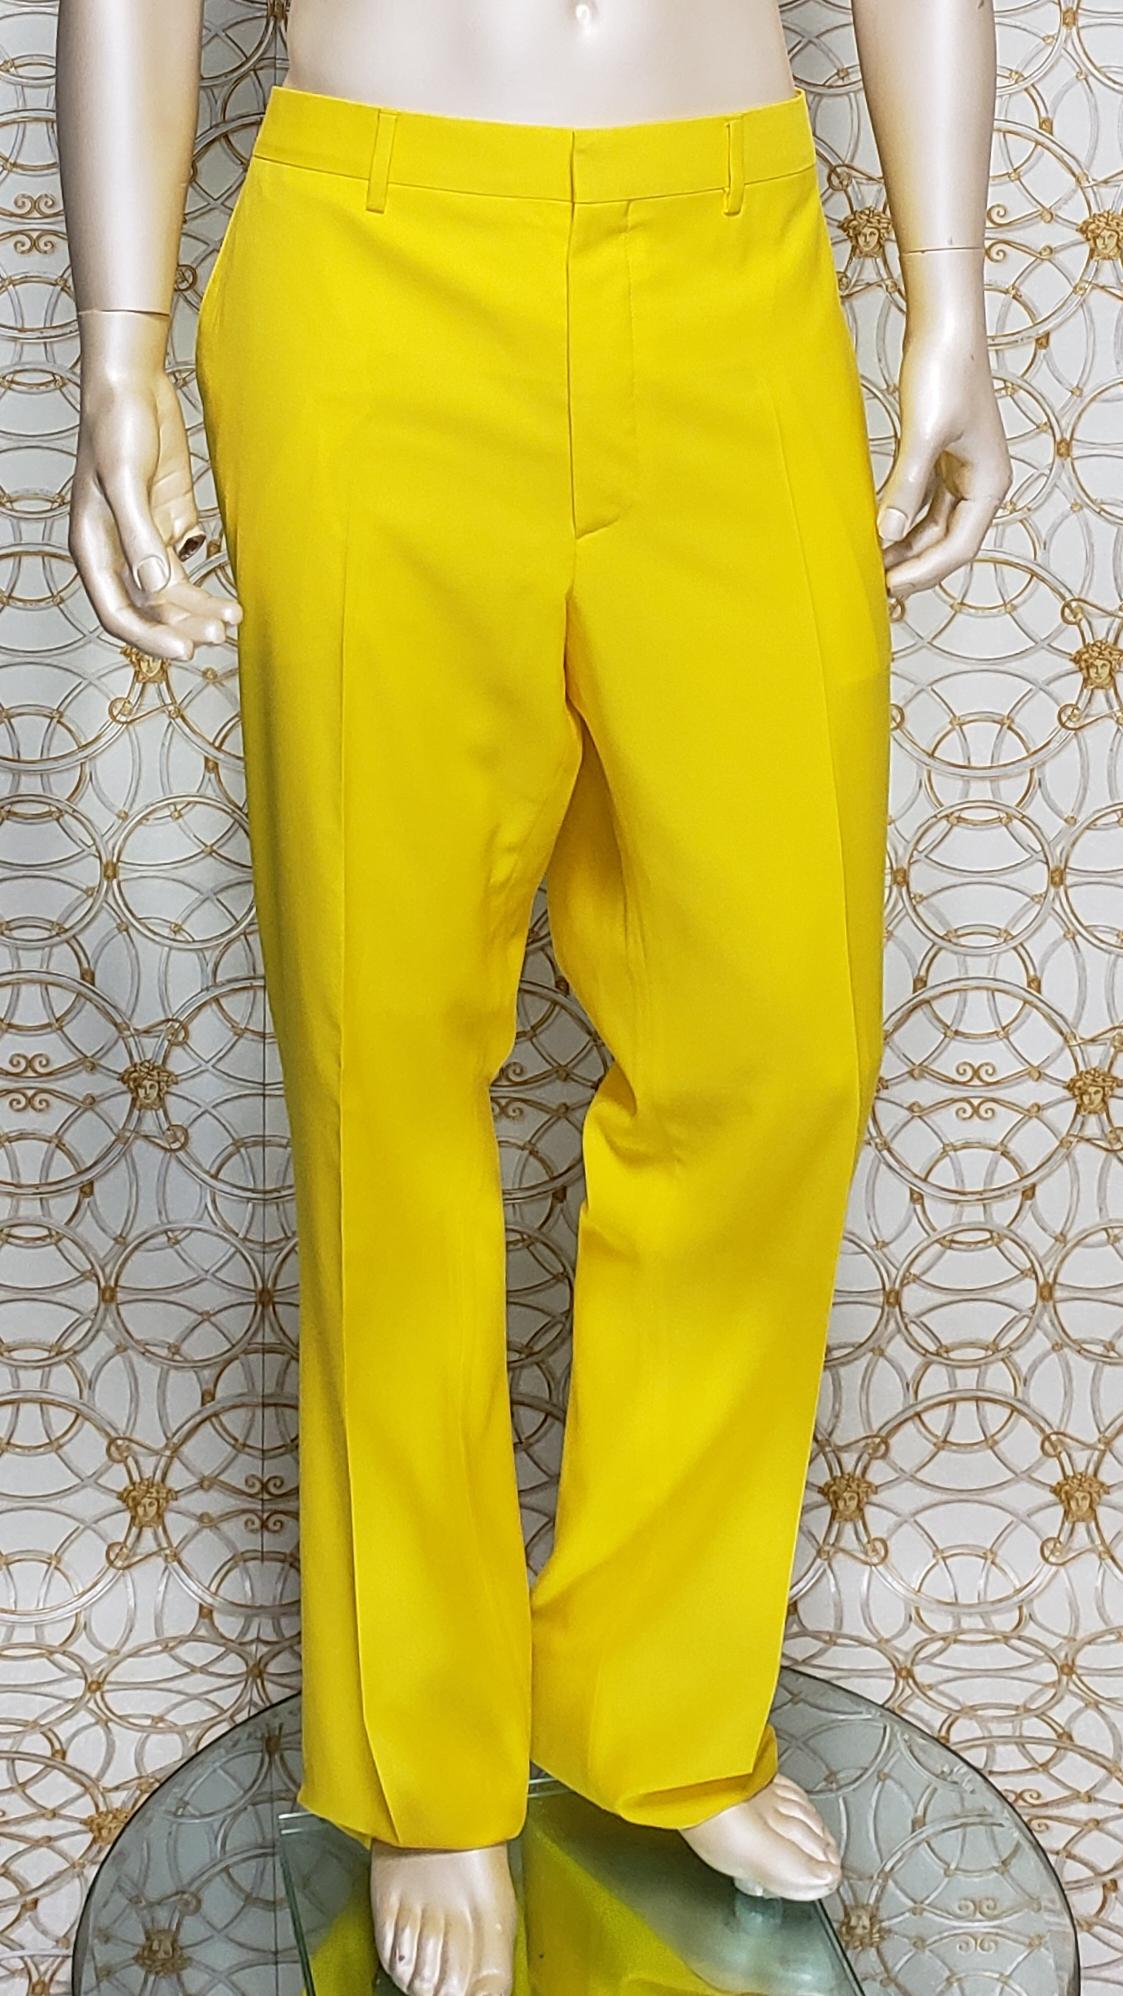 VERSACE YELLOW TAILOR MADE 2pc SUIT 58 - 48 (4XL) For Sale 1